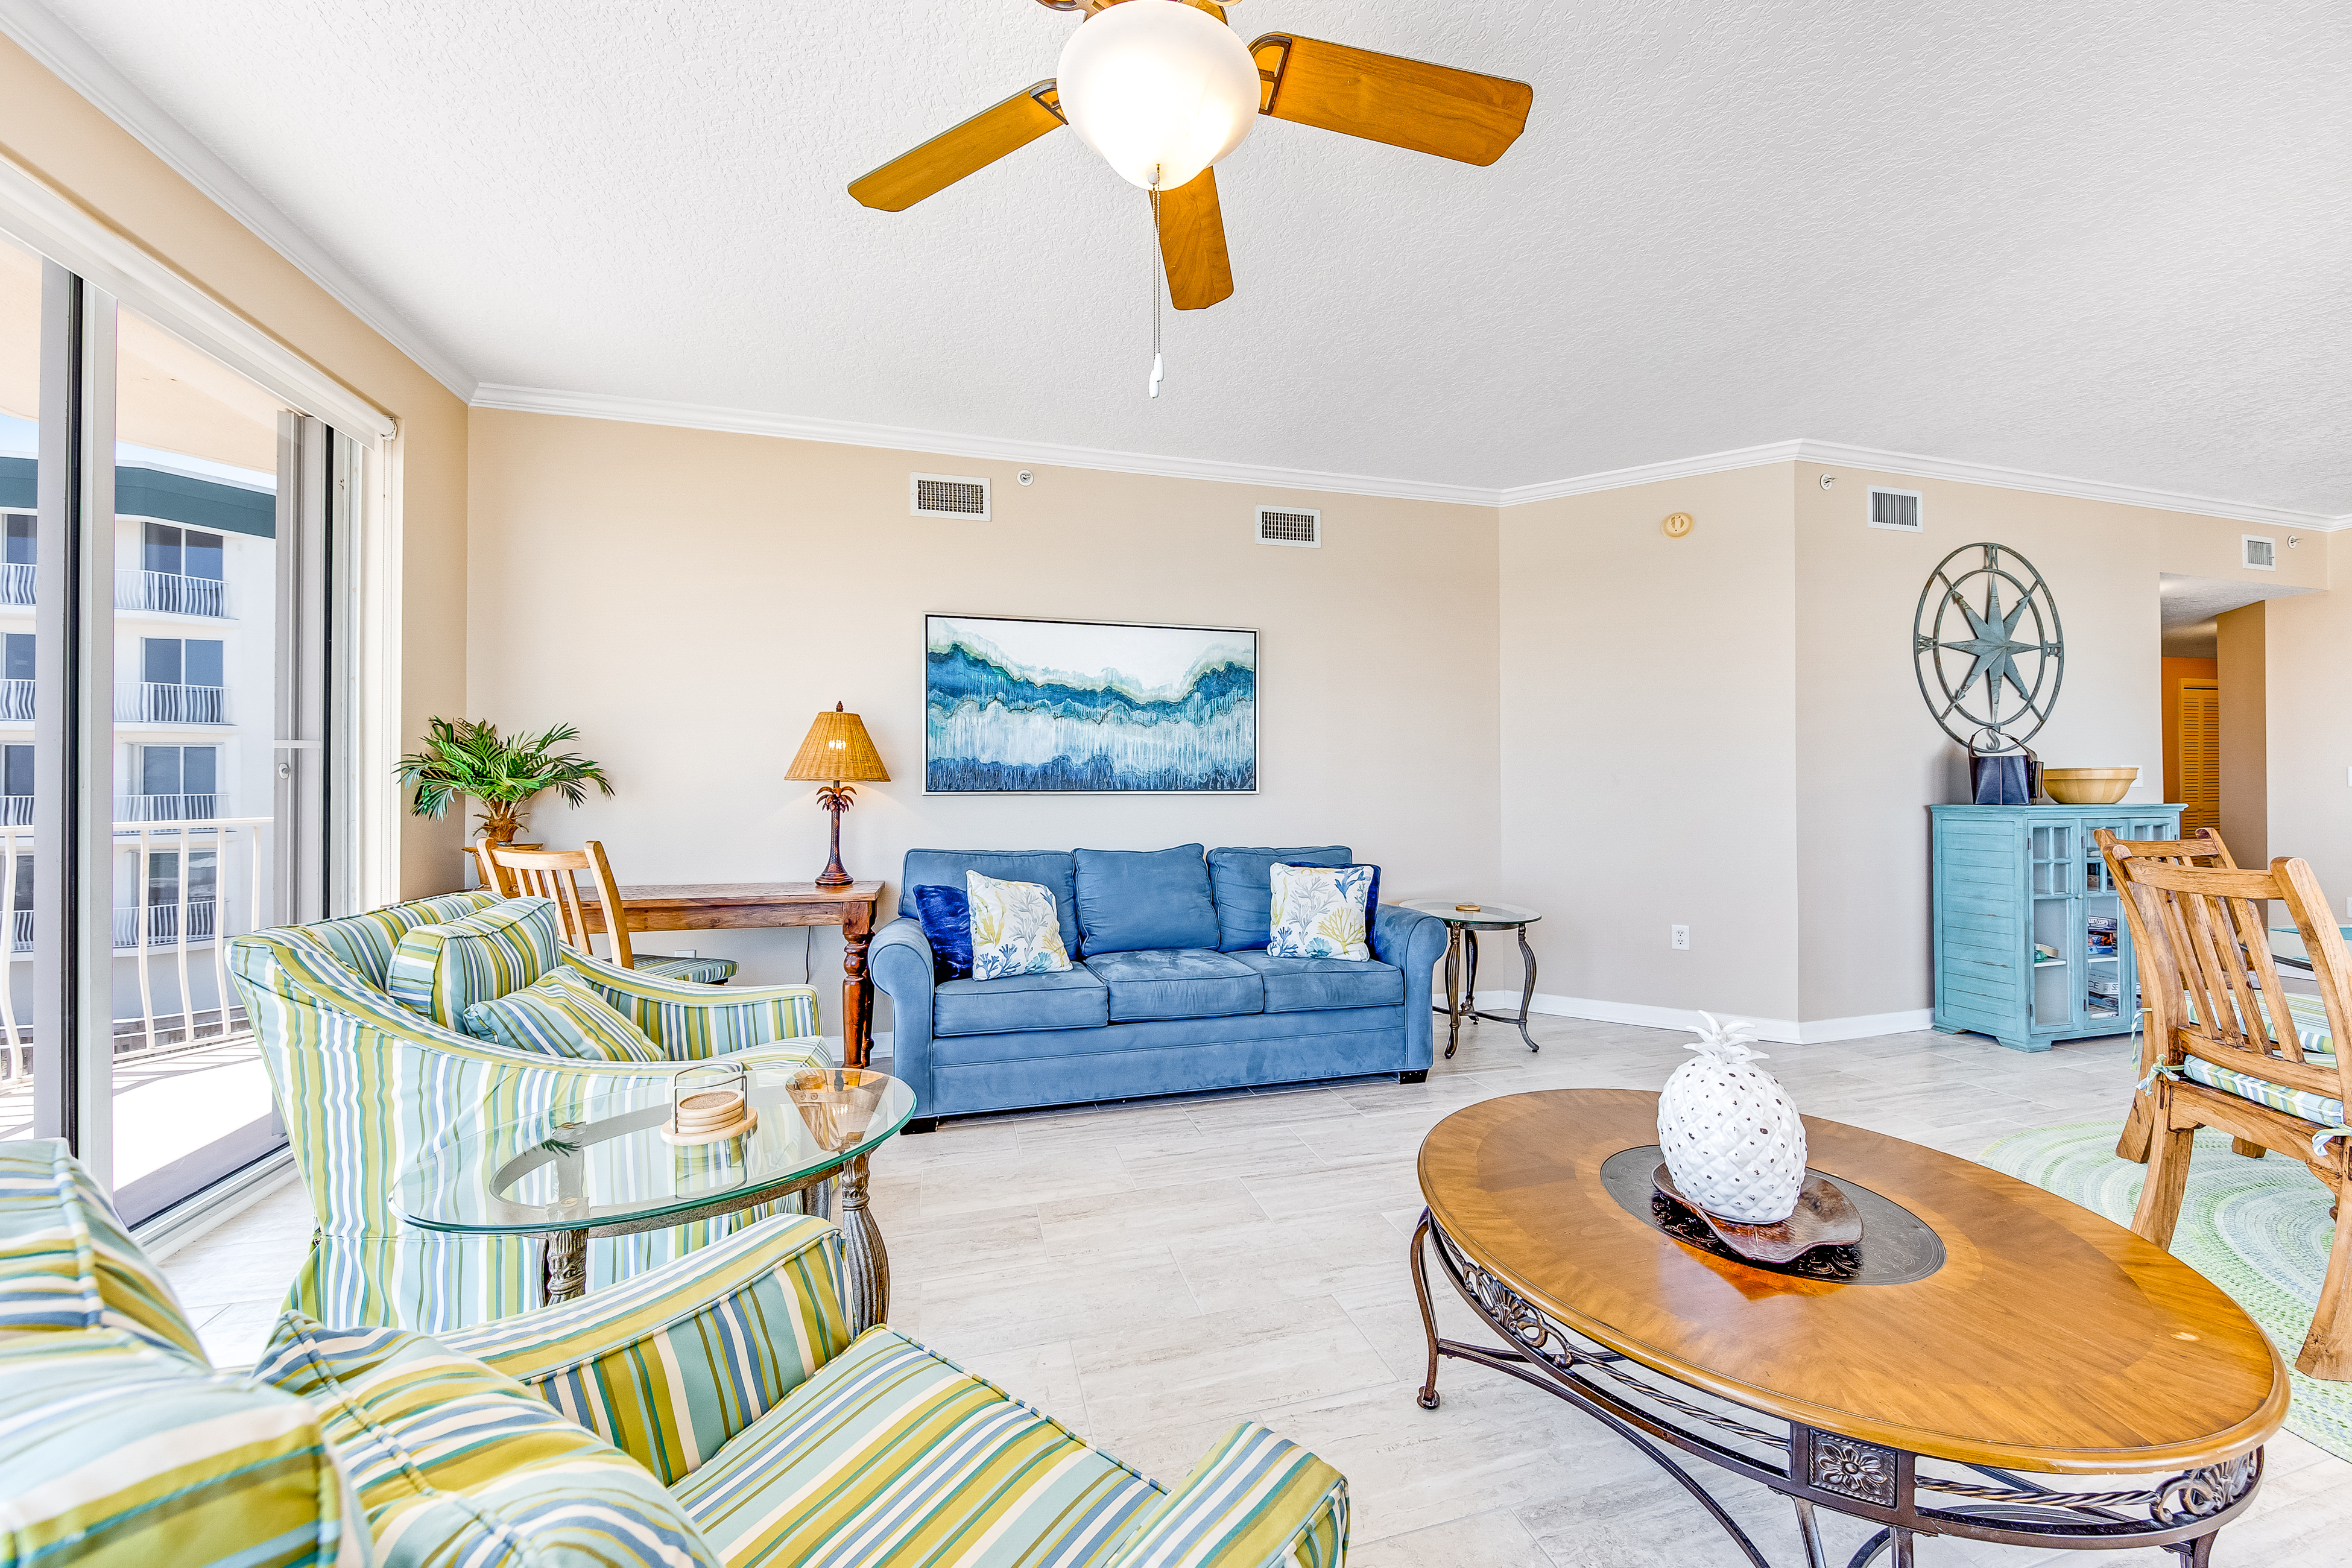 Dunes of Seagrove A210 Condo rental in Dunes of Seagrove in Highway 30-A Florida - #4